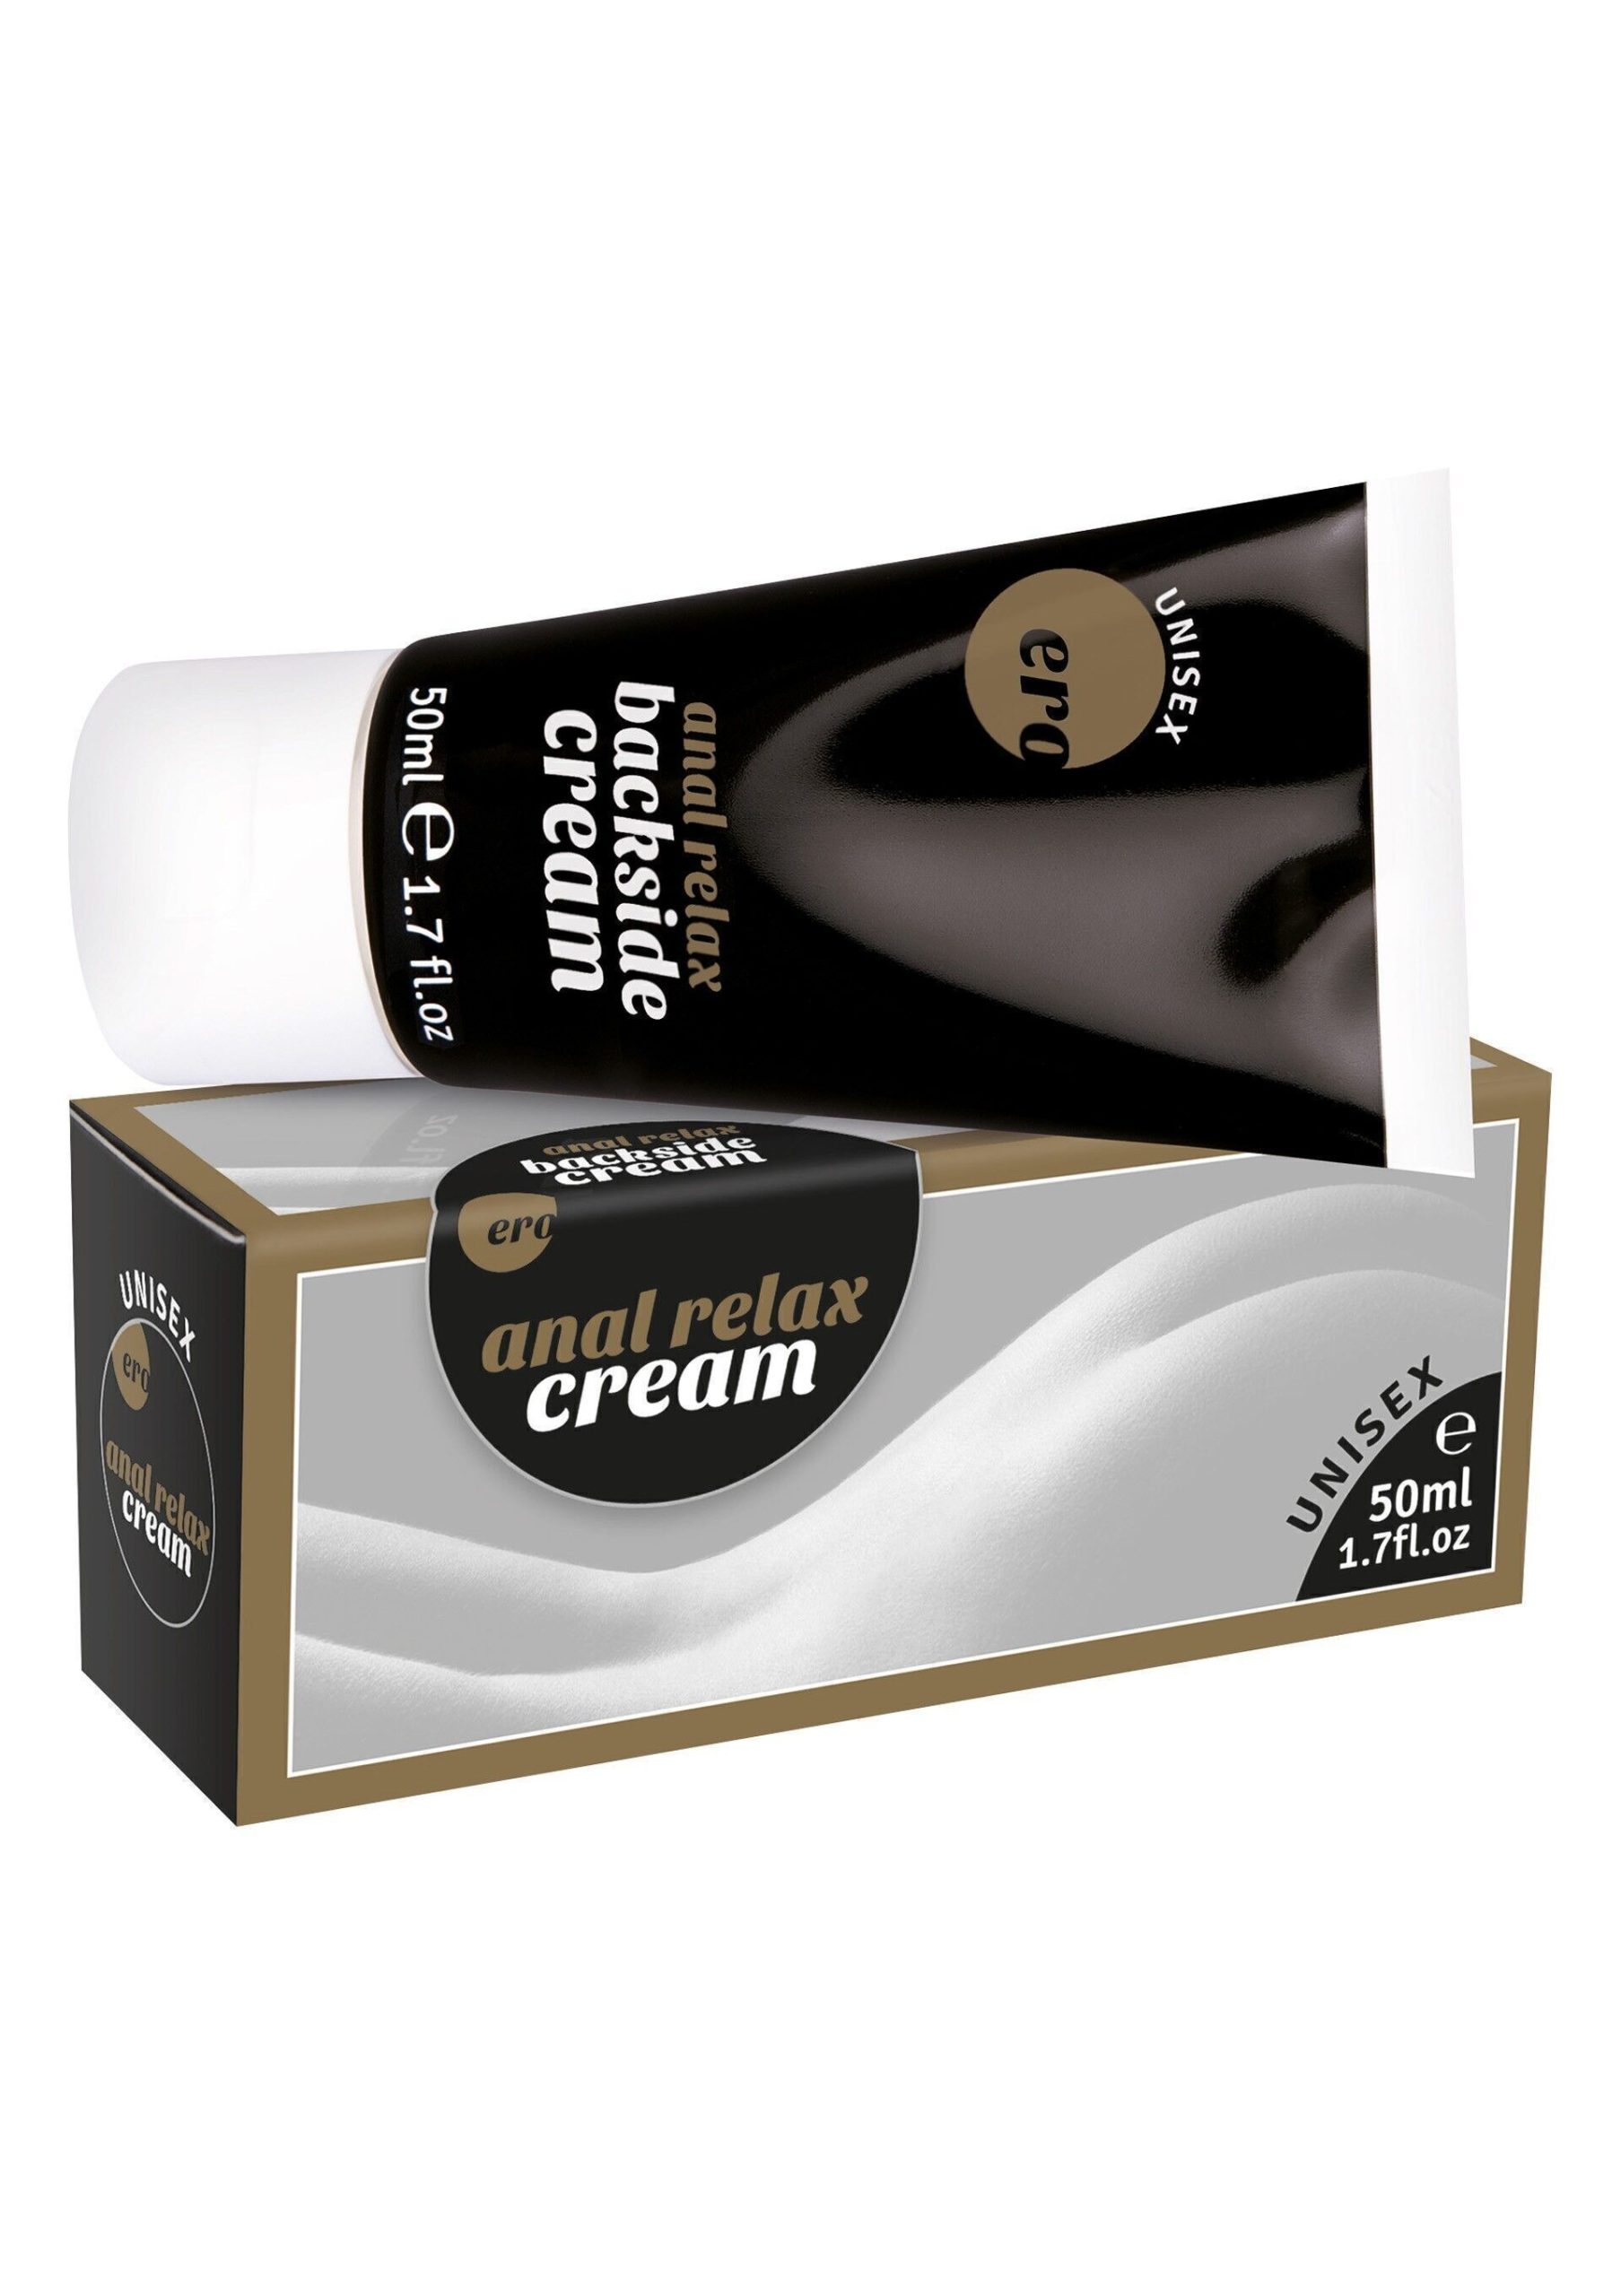 Crema relax anale 50ml